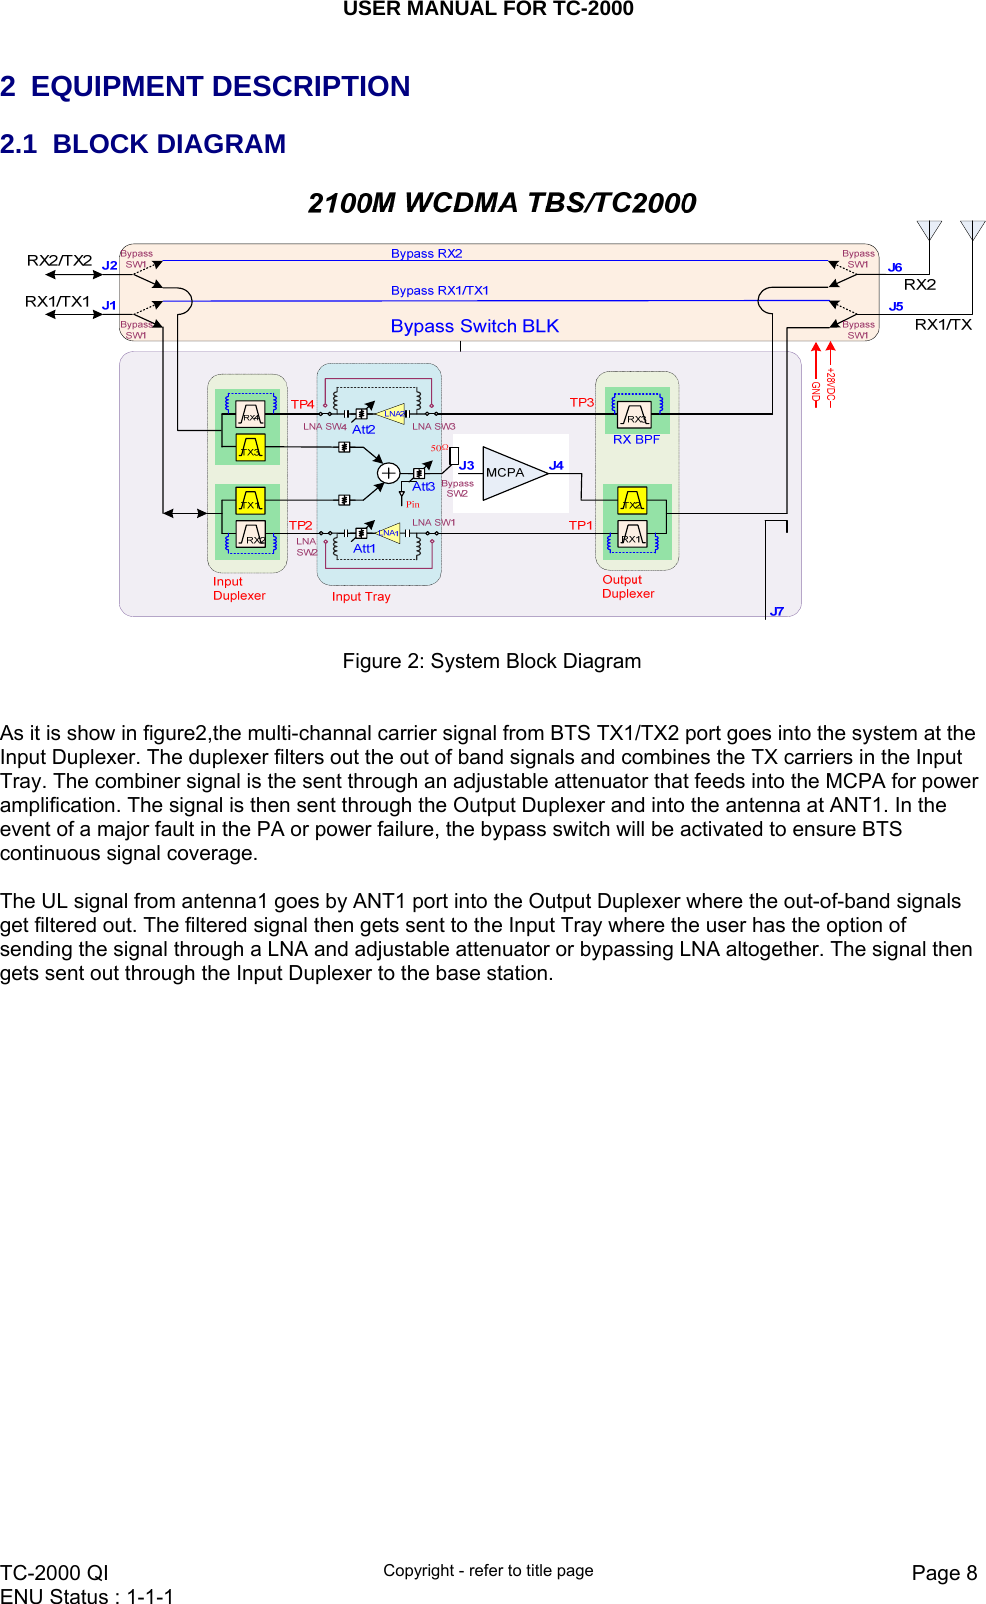 USER MANUAL FOR TC-2000   TC-2000 QI  Copyright - refer to title page  Page 8ENU Status : 1-1-1    2 EQUIPMENT DESCRIPTION 2.1 BLOCK DIAGRAM  Figure 2: System Block Diagram   As it is show in figure2,the multi-channal carrier signal from BTS TX1/TX2 port goes into the system at the Input Duplexer. The duplexer filters out the out of band signals and combines the TX carriers in the Input Tray. The combiner signal is the sent through an adjustable attenuator that feeds into the MCPA for power amplification. The signal is then sent through the Output Duplexer and into the antenna at ANT1. In the event of a major fault in the PA or power failure, the bypass switch will be activated to ensure BTS continuous signal coverage.   The UL signal from antenna1 goes by ANT1 port into the Output Duplexer where the out-of-band signals get filtered out. The filtered signal then gets sent to the Input Tray where the user has the option of sending the signal through a LNA and adjustable attenuator or bypassing LNA altogether. The signal then gets sent out through the Input Duplexer to the base station.                        